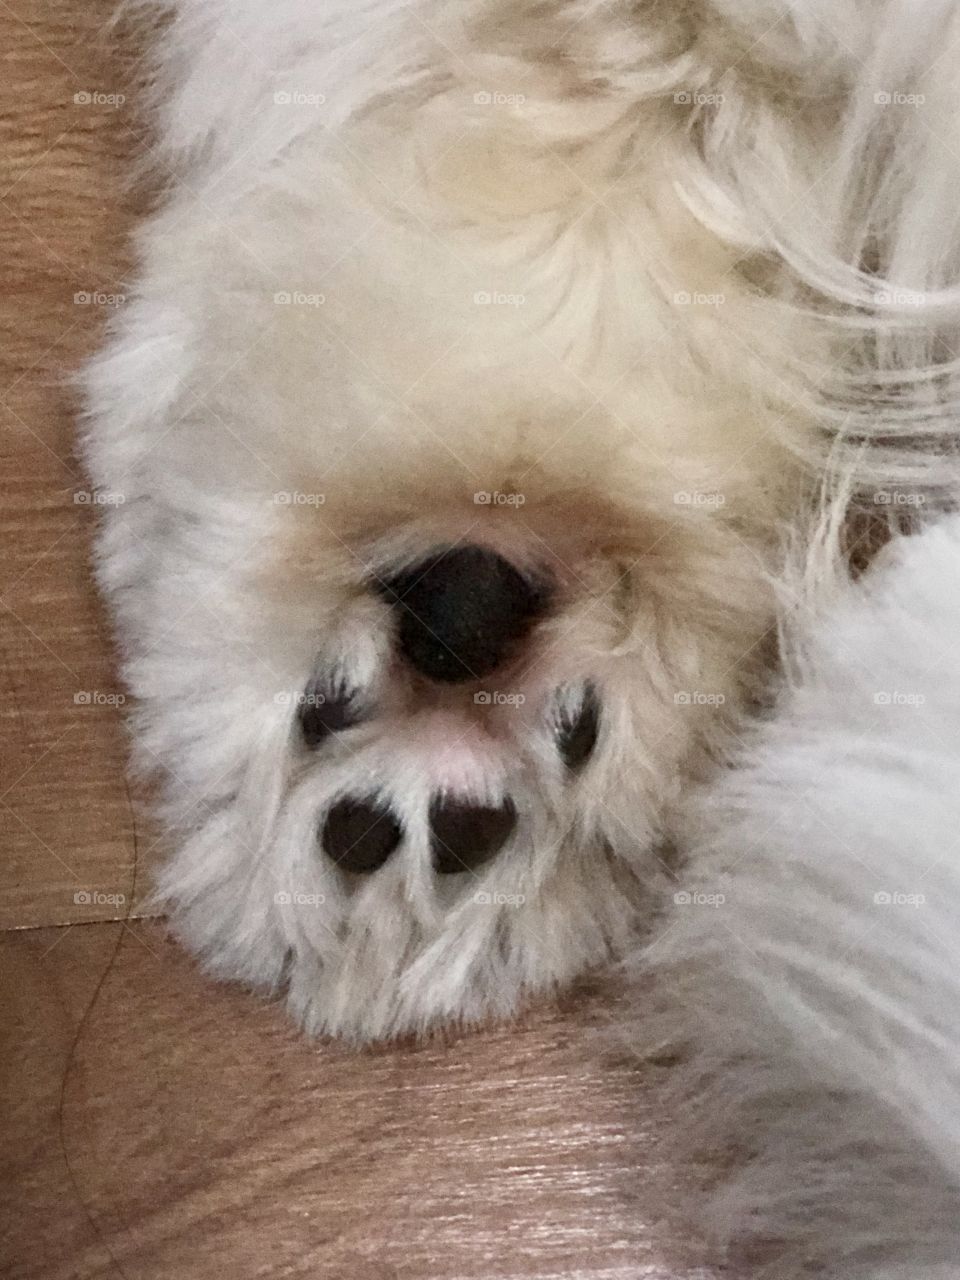 Cutest dog paw that Is have had see